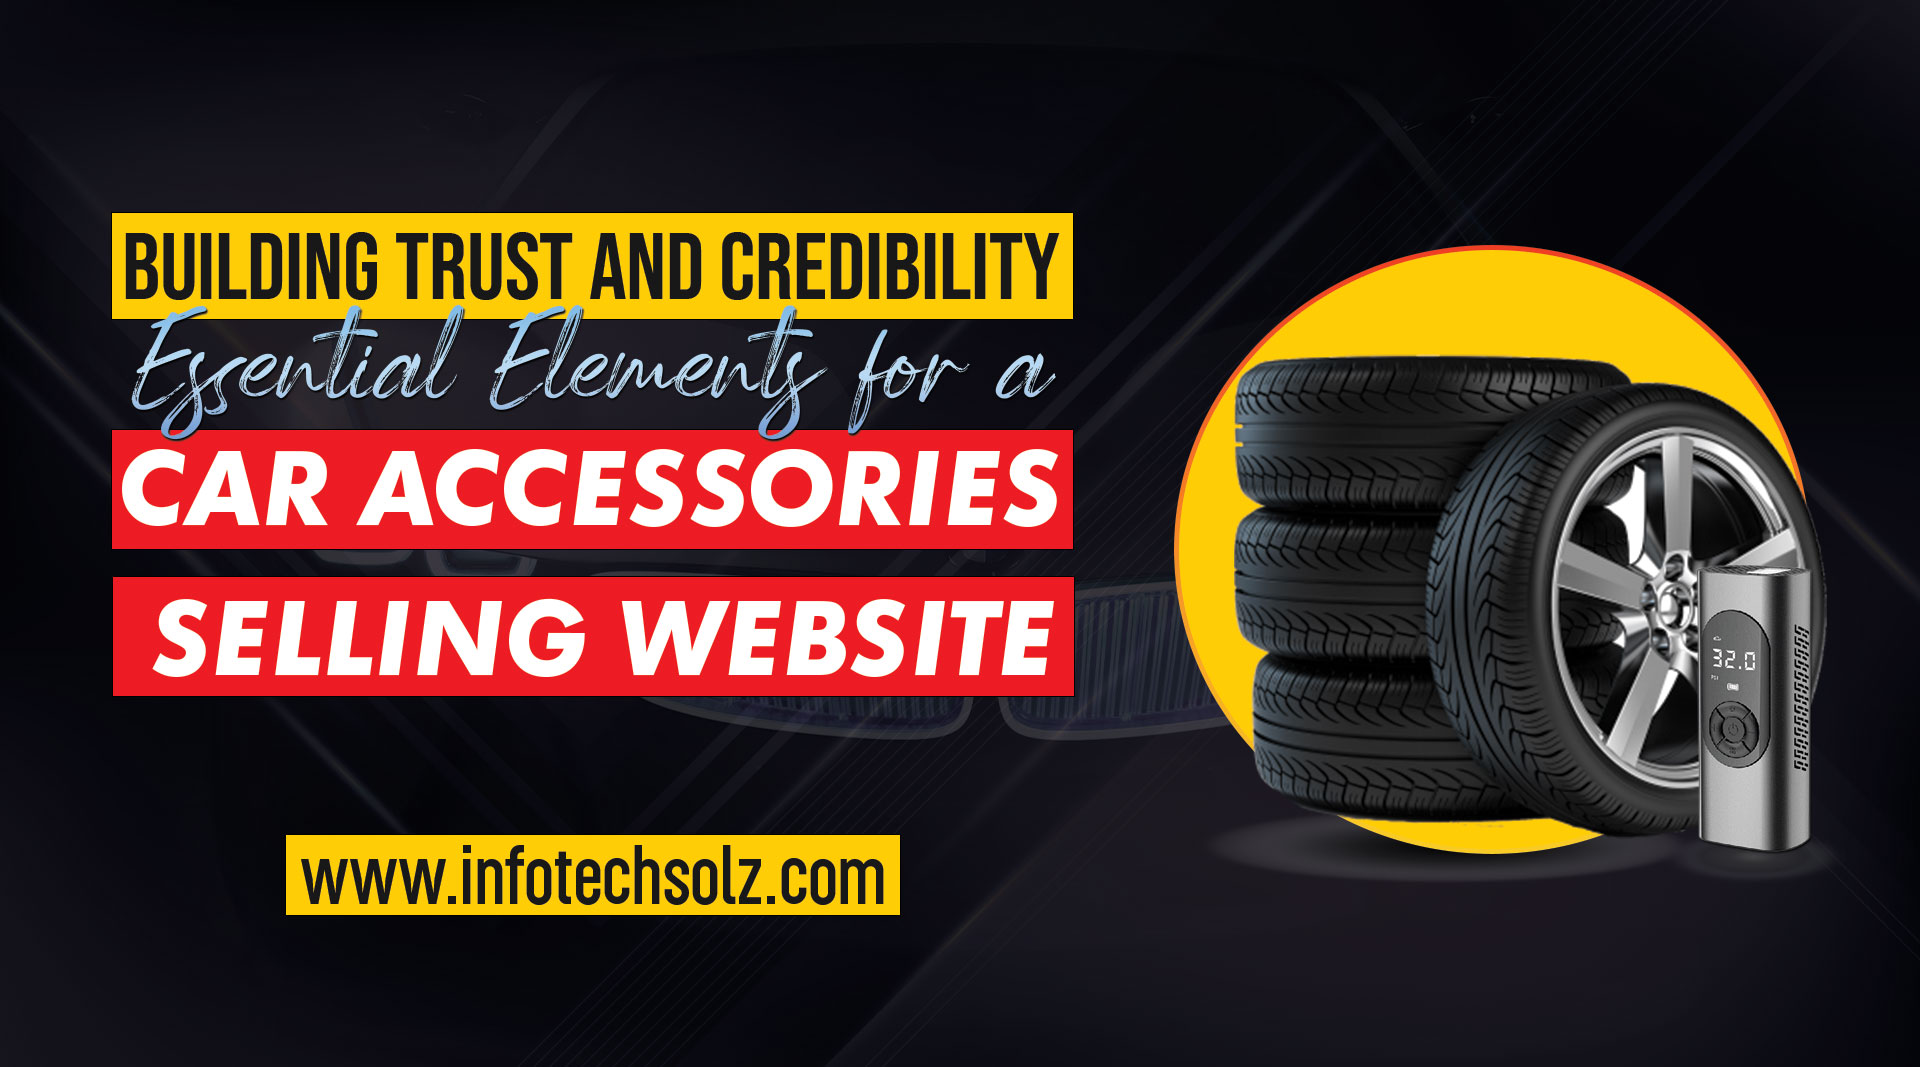 Building Trust and Credibility: Essential Elements for a Car Accessories Selling Website